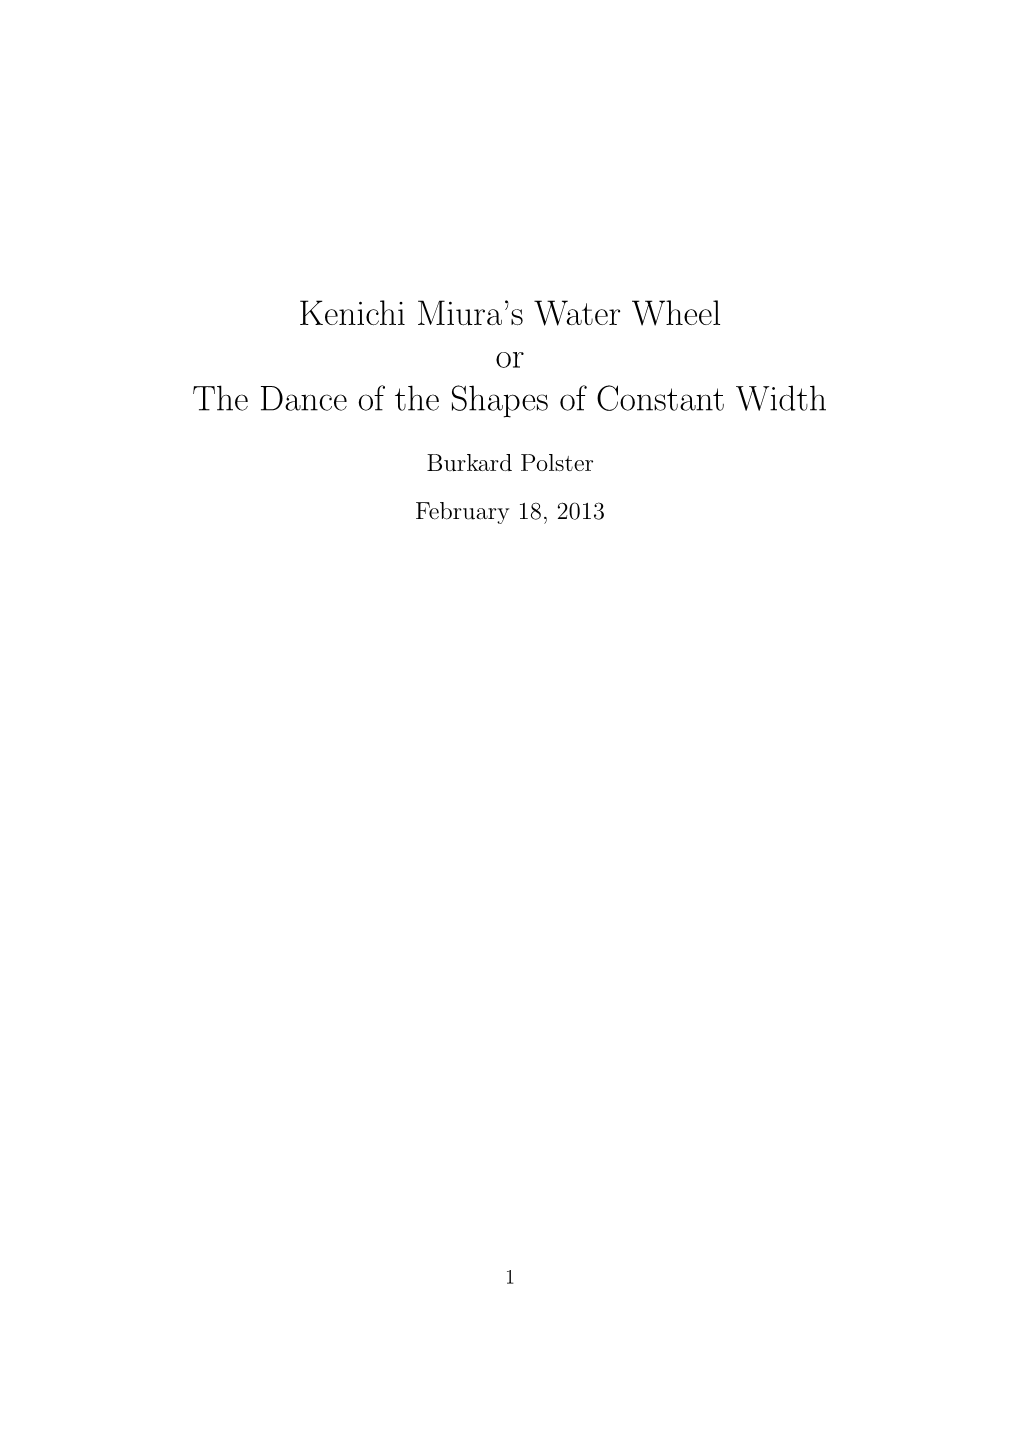 Kenichi Miura's Water Wheel, Or the Dance of the Shapes of Constant Width